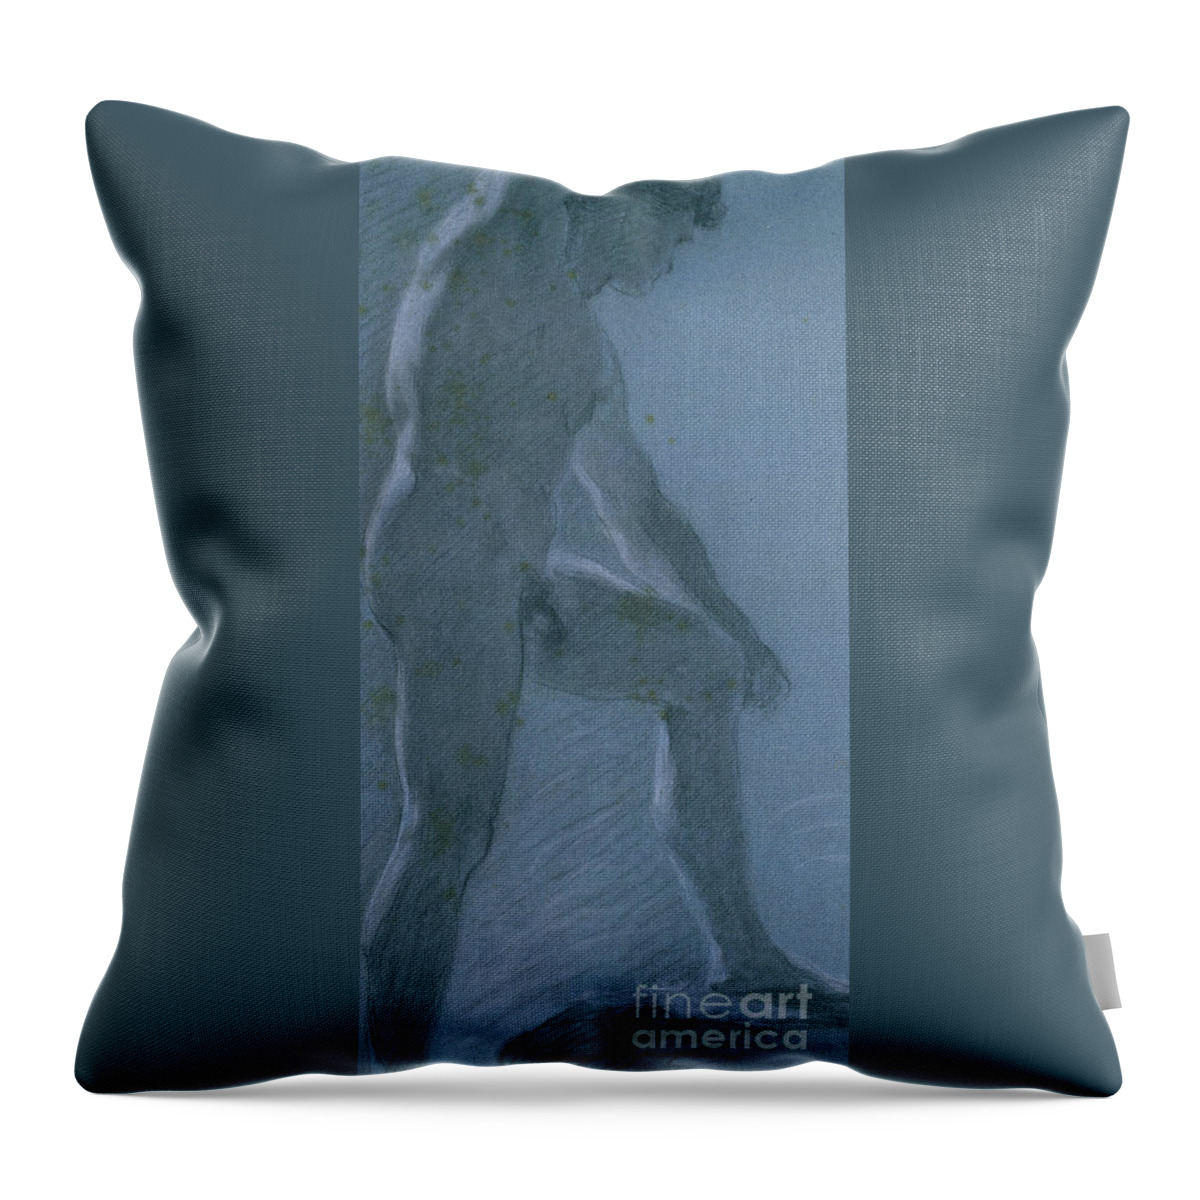 Blue Throw Pillow featuring the pastel Study of a Male Nude by Pierre Paul Prudhon